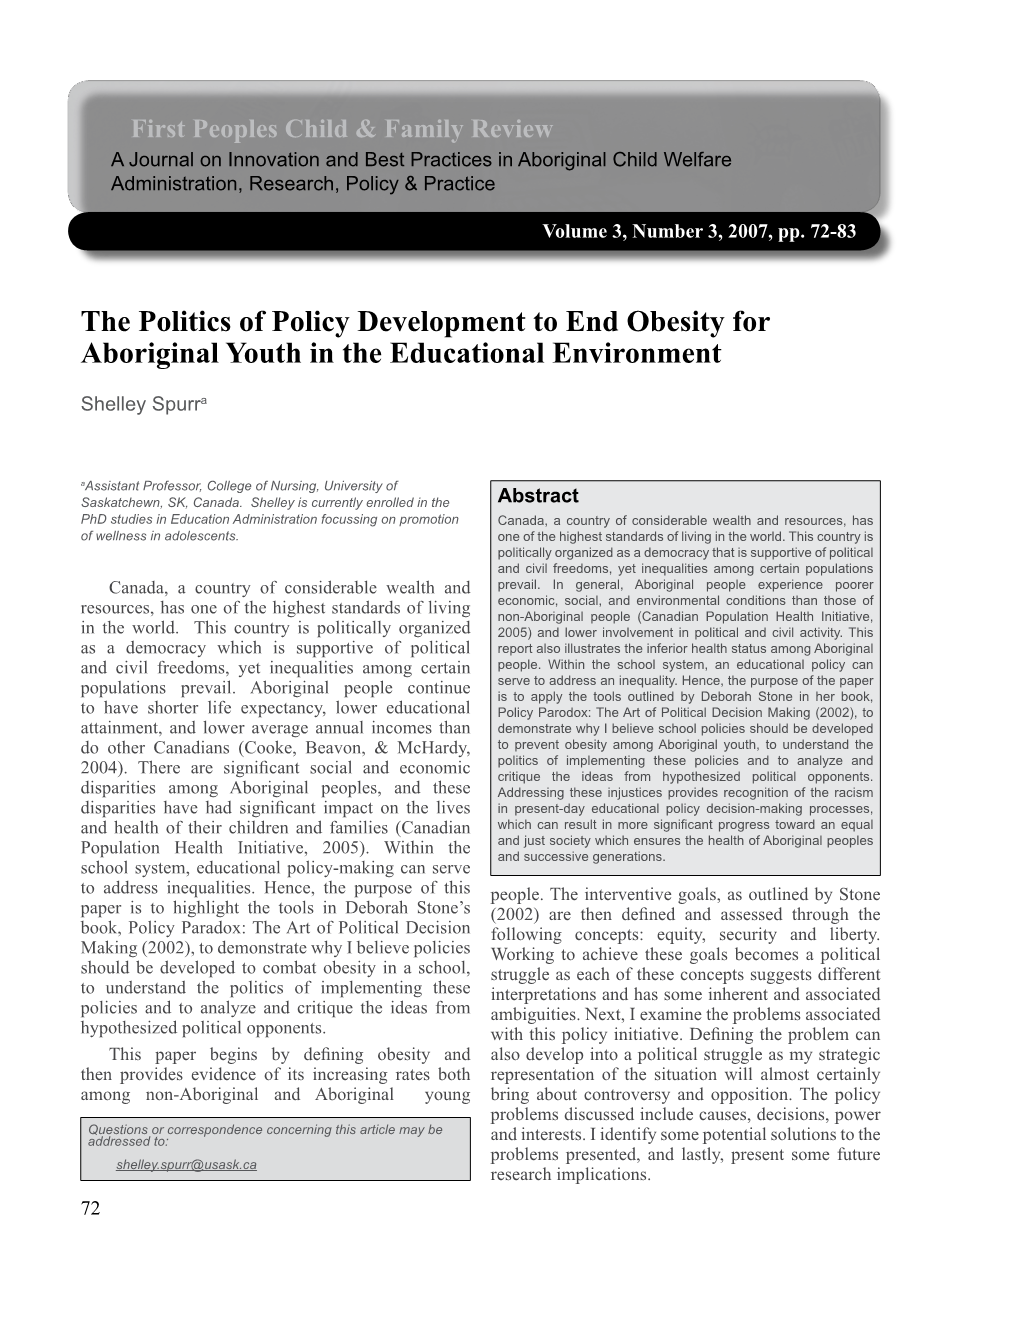 The Politics of Policy Development to End Obesity for Aboriginal Youth in the Educational Environment